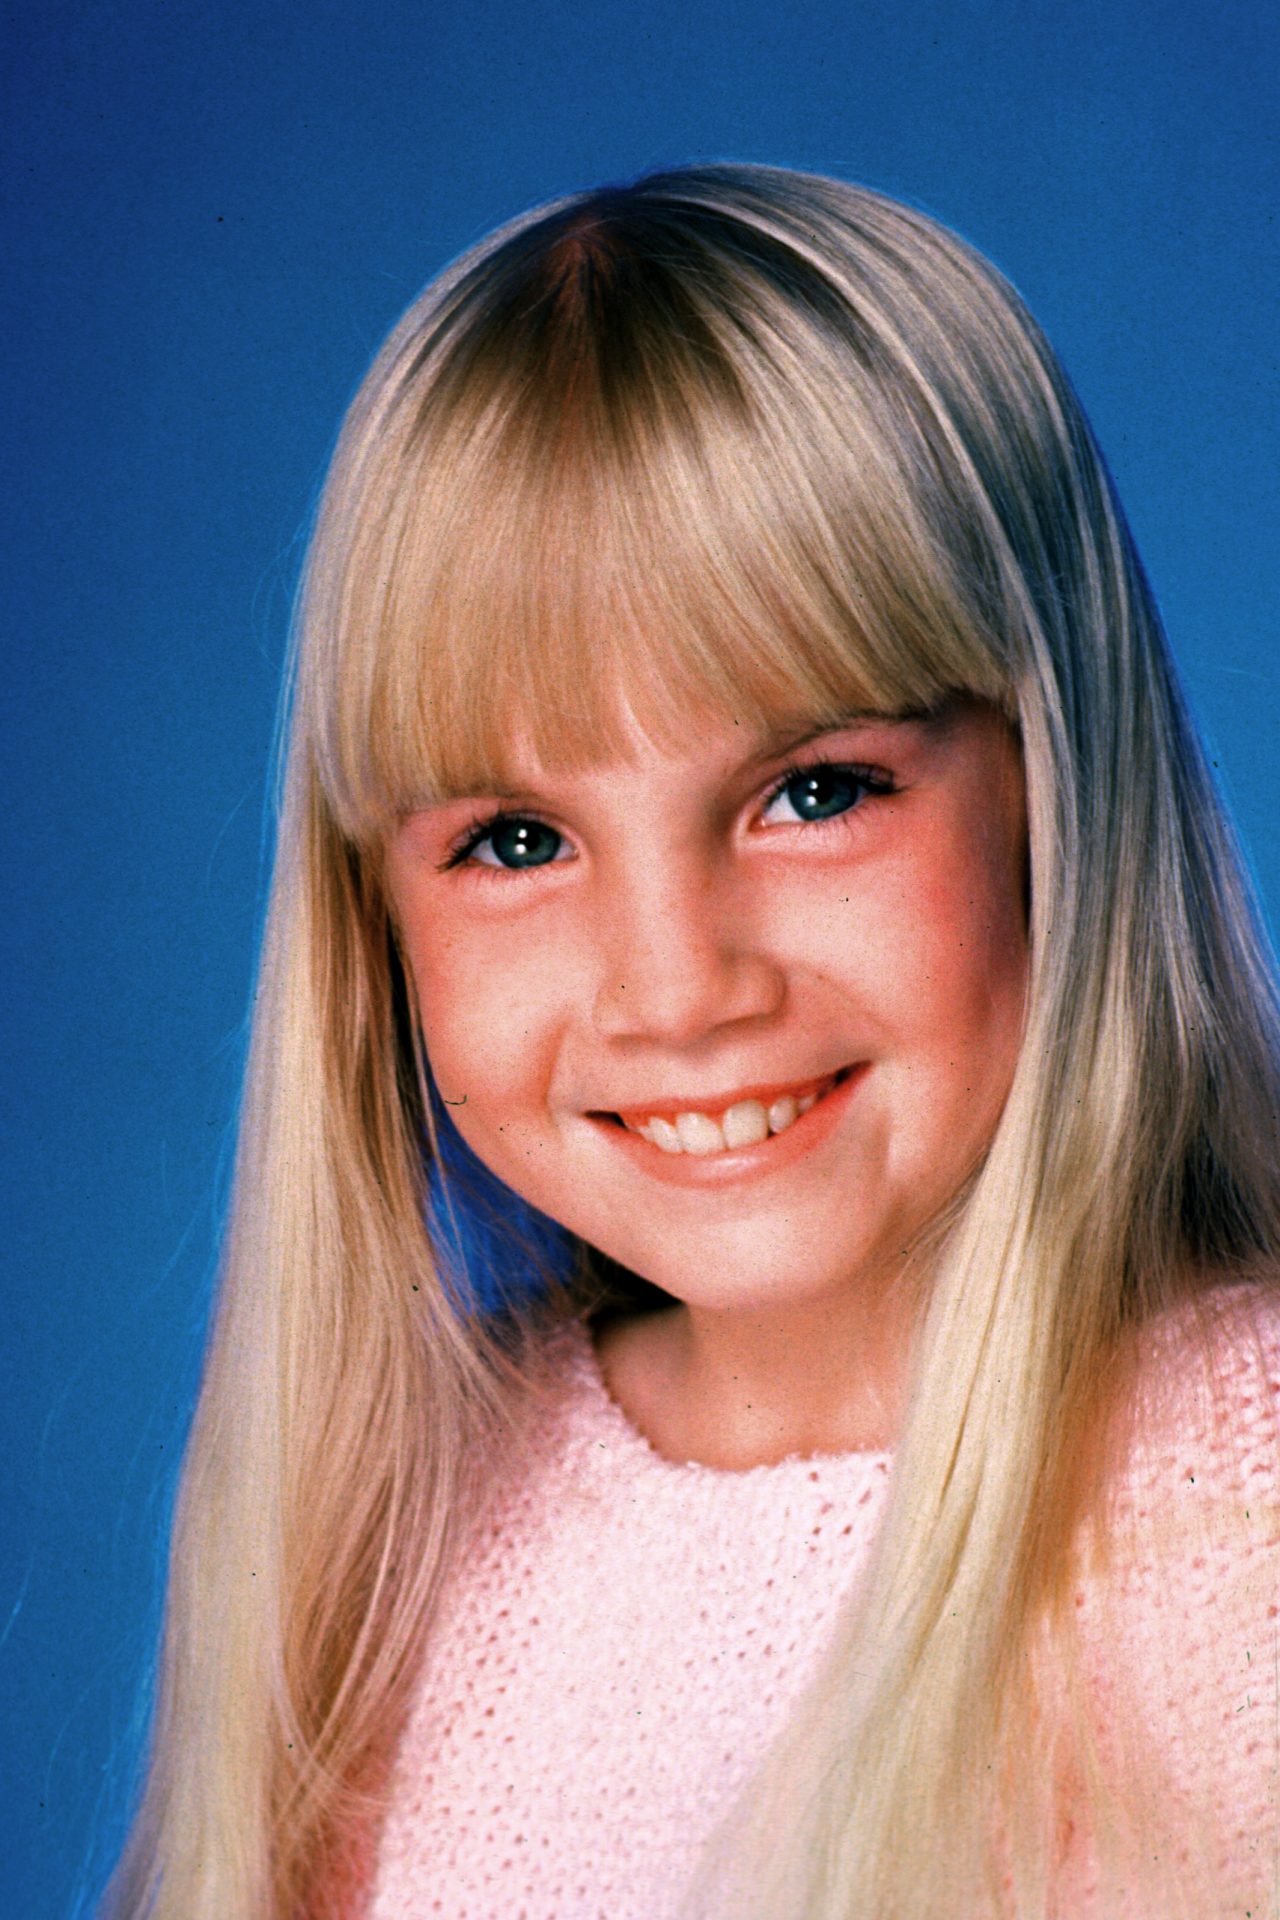 <p>12 years old - Famous for playing Carol Anne Freeling in the 'Poltergeist' trilogy, the girl died at age 12 from a blatant medical error. She was diagnosed with Crohn's Disease when she actually had an intestinal obstruction. Heather died in the operating room, between septic shock and cardiac arrest, just weeks after shooting 'Poltergeist III.'</p>